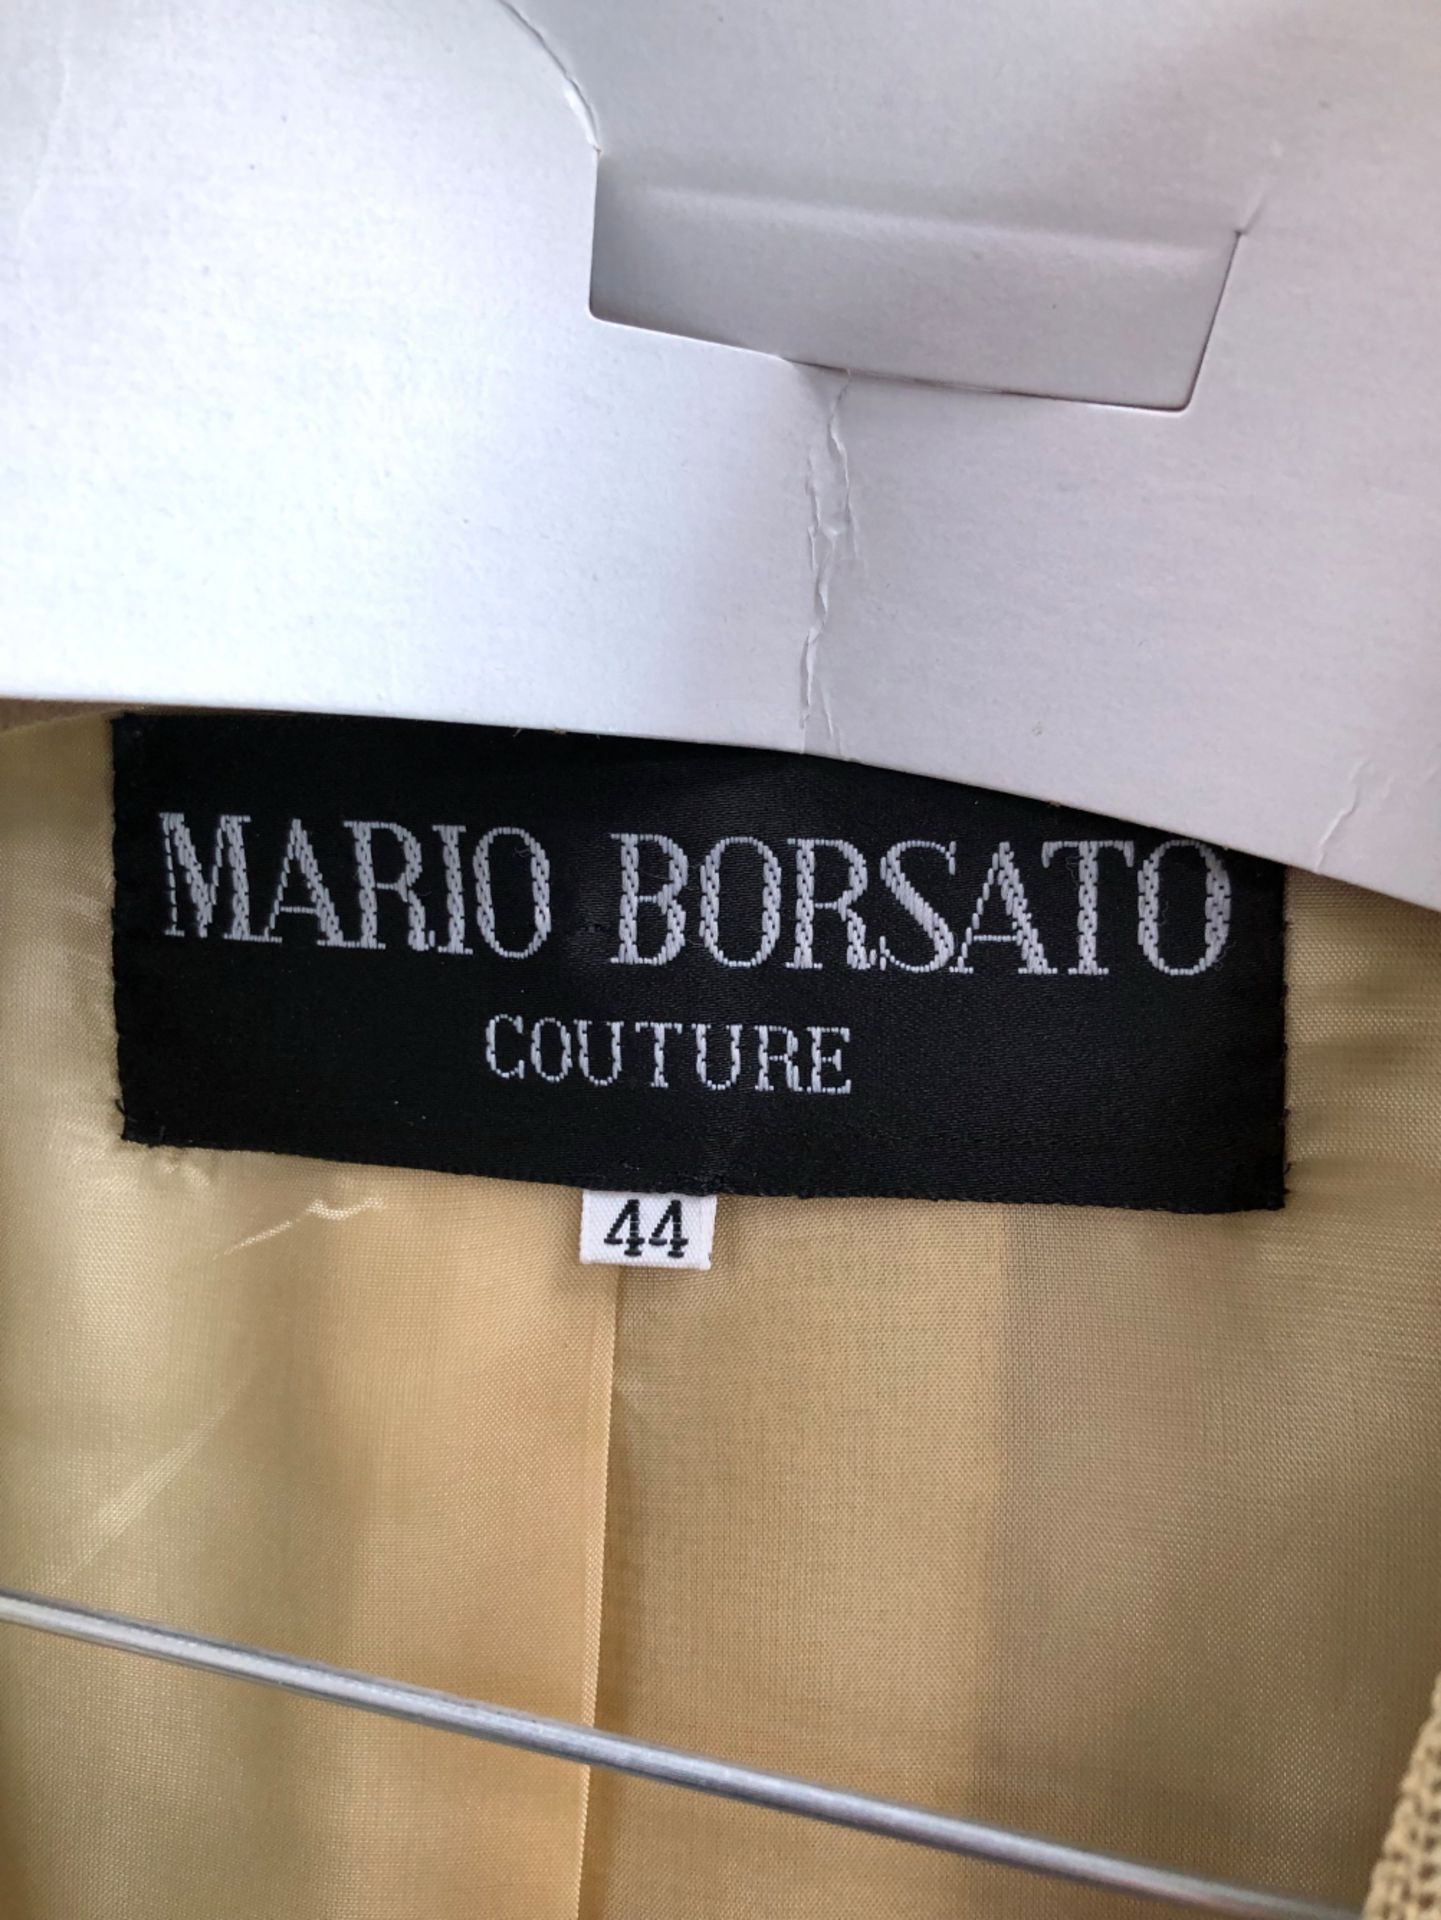 MARIO BORSATO COUTURE SAND LADIES TWO PIECE SUIT JACKET SIZE 44, TOGETHER WITH AN ANTONETTE FRANZ - Image 11 of 19